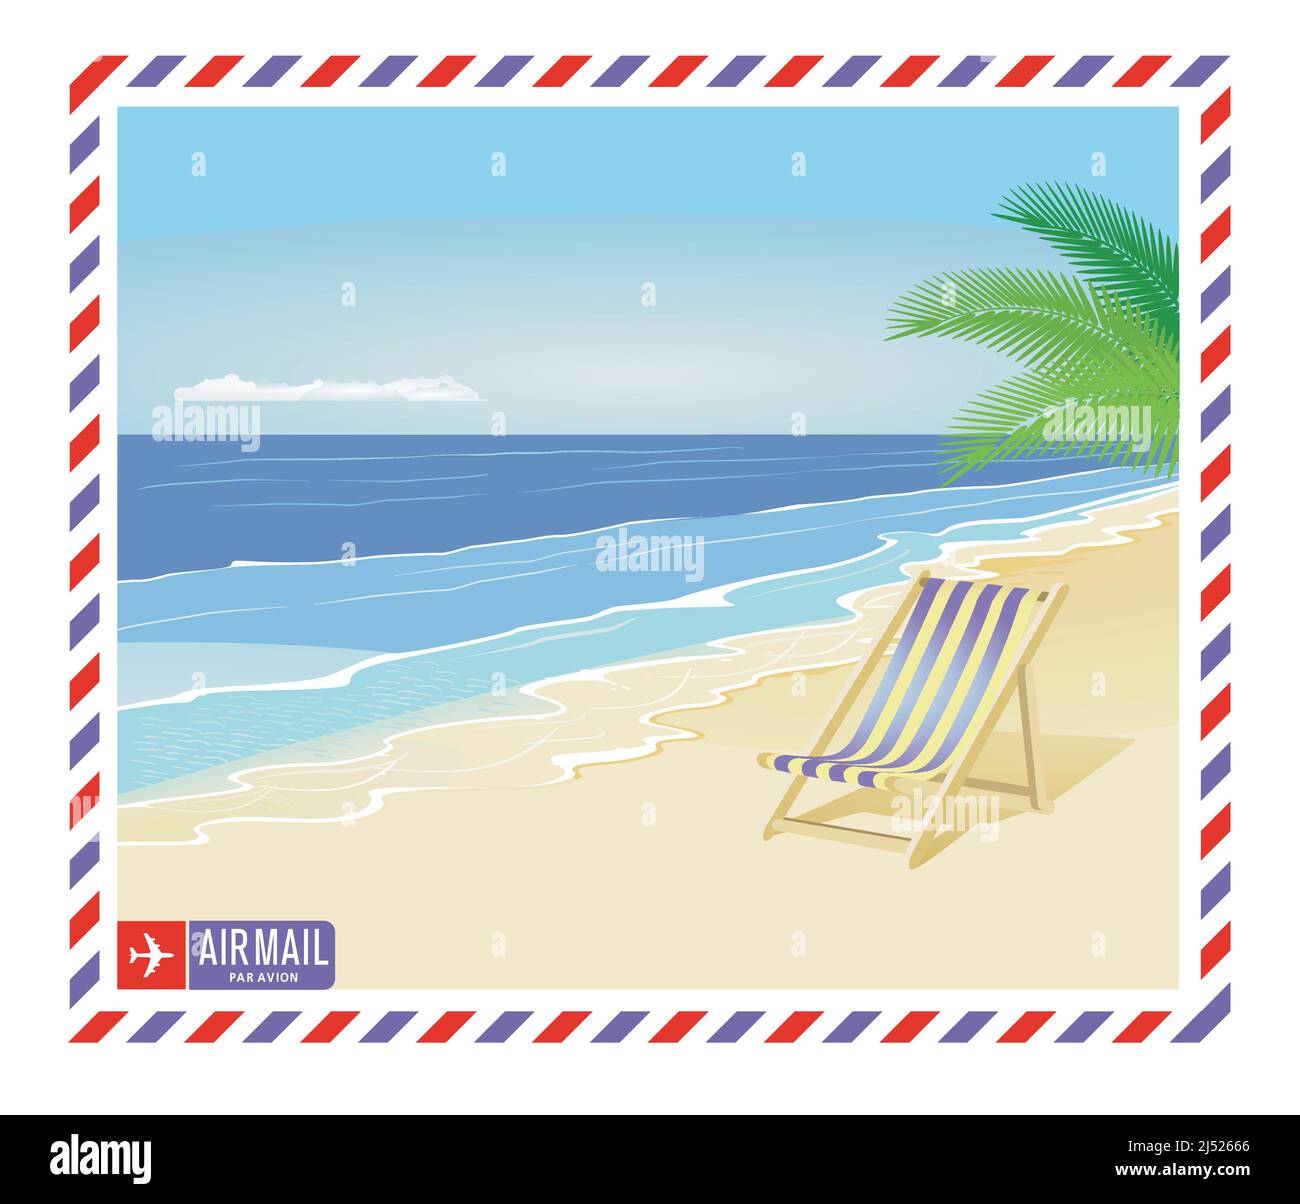 air mail from vacation illustration Stock Vector